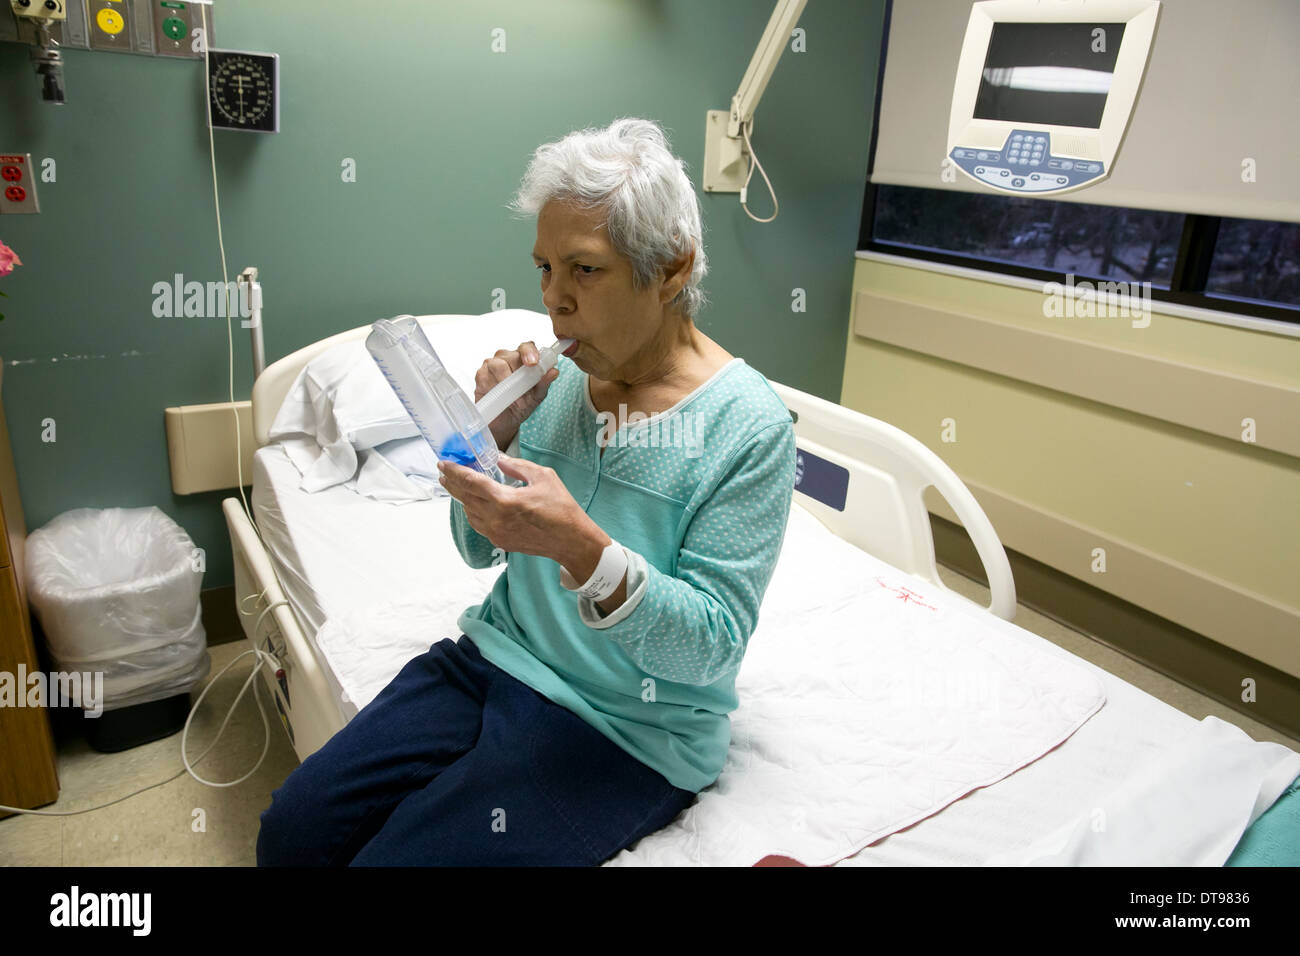 75 year old Hispanic senior citizen uses a medical breathing exercise apparatus while in a rehabilitation hospital in Texas. Stock Photo